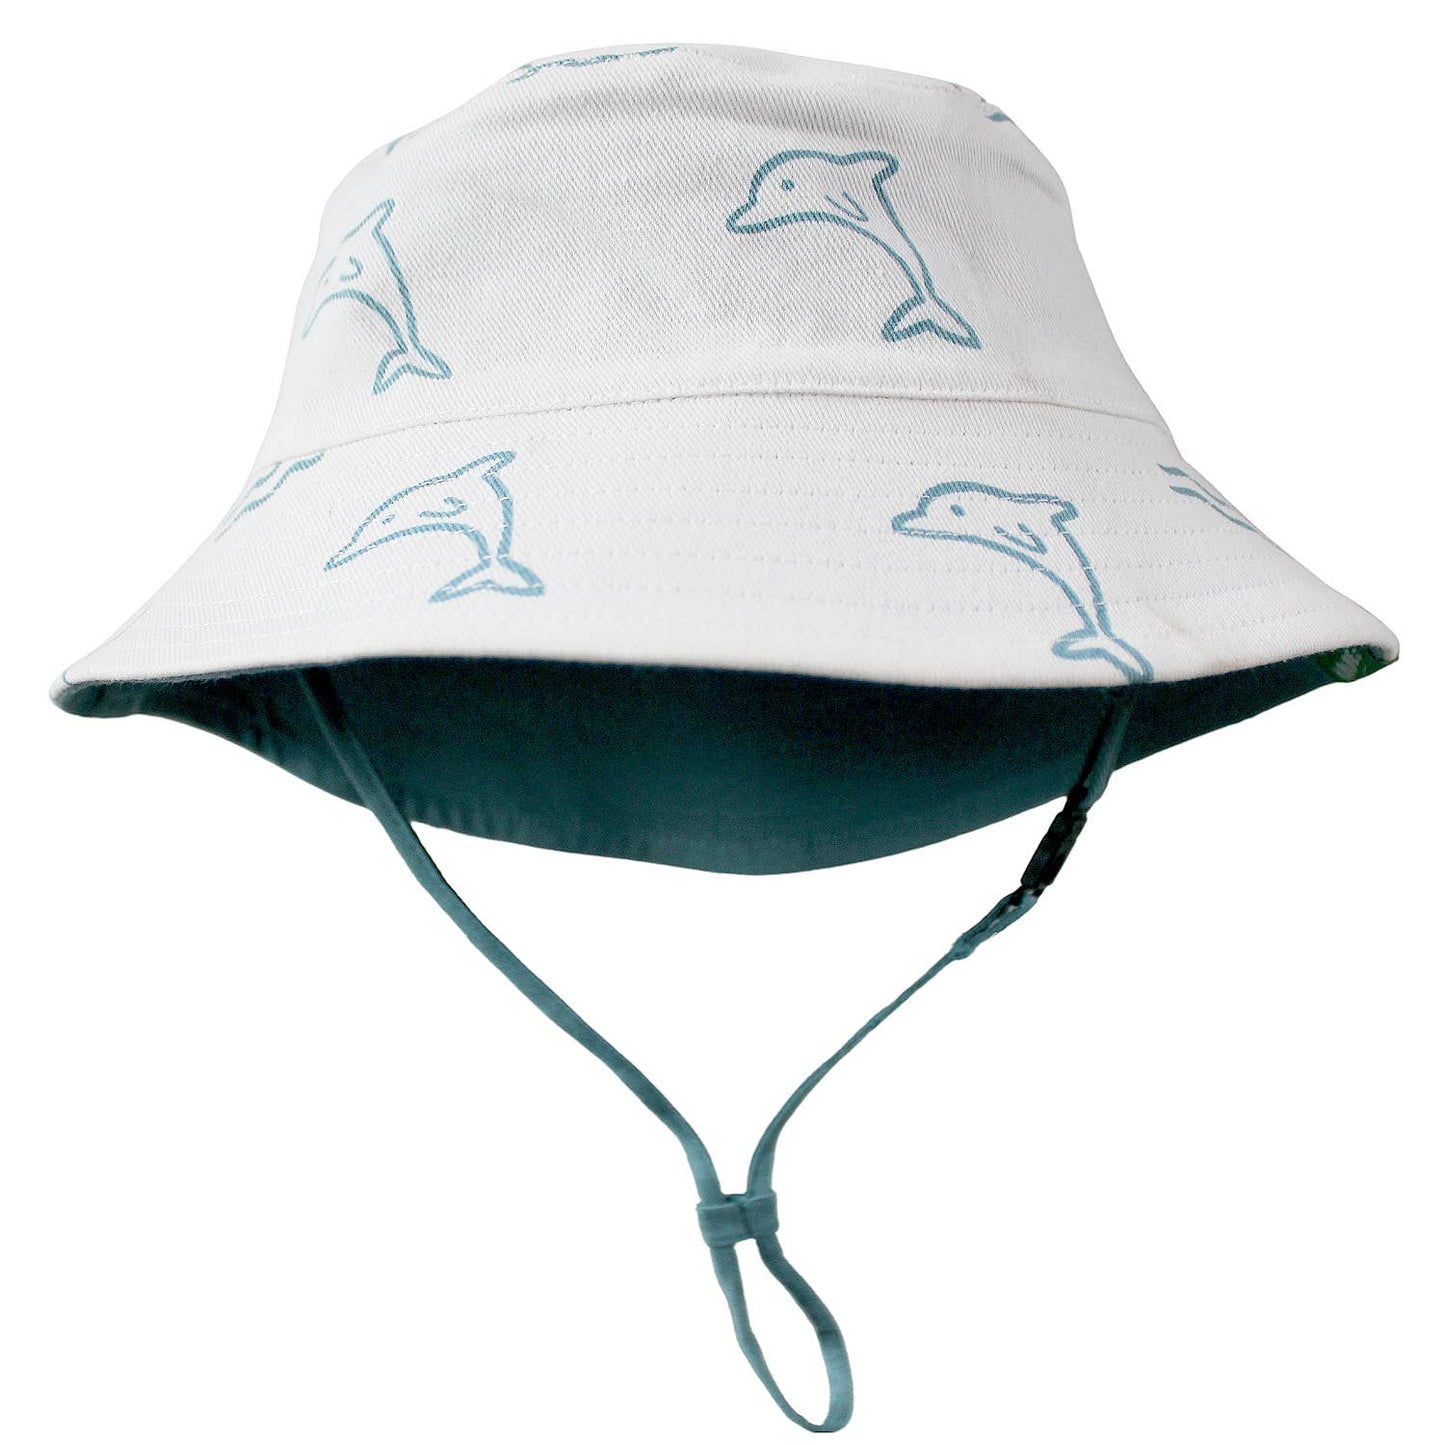 Reversible Organic Cotton Bucket Hats - Dolphins and Ocean